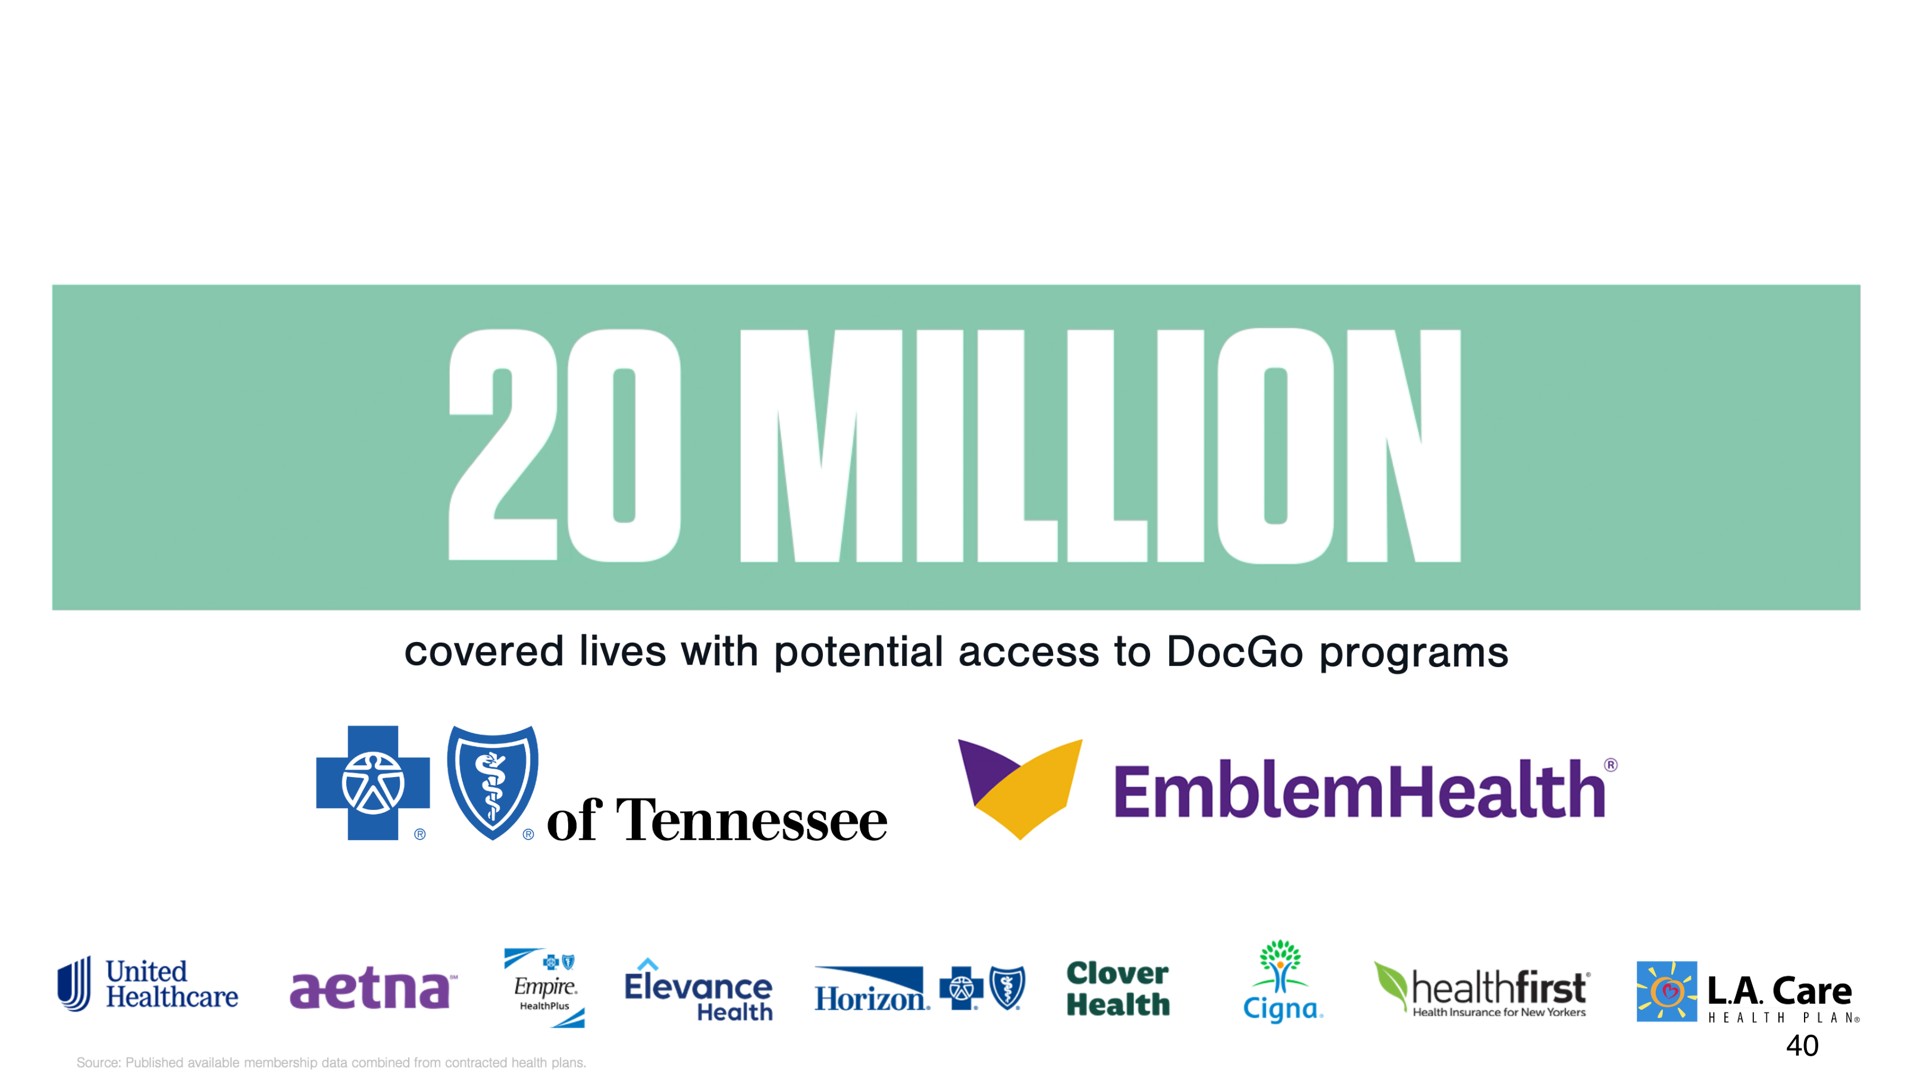 covered lives with potential access to programs | DocGo